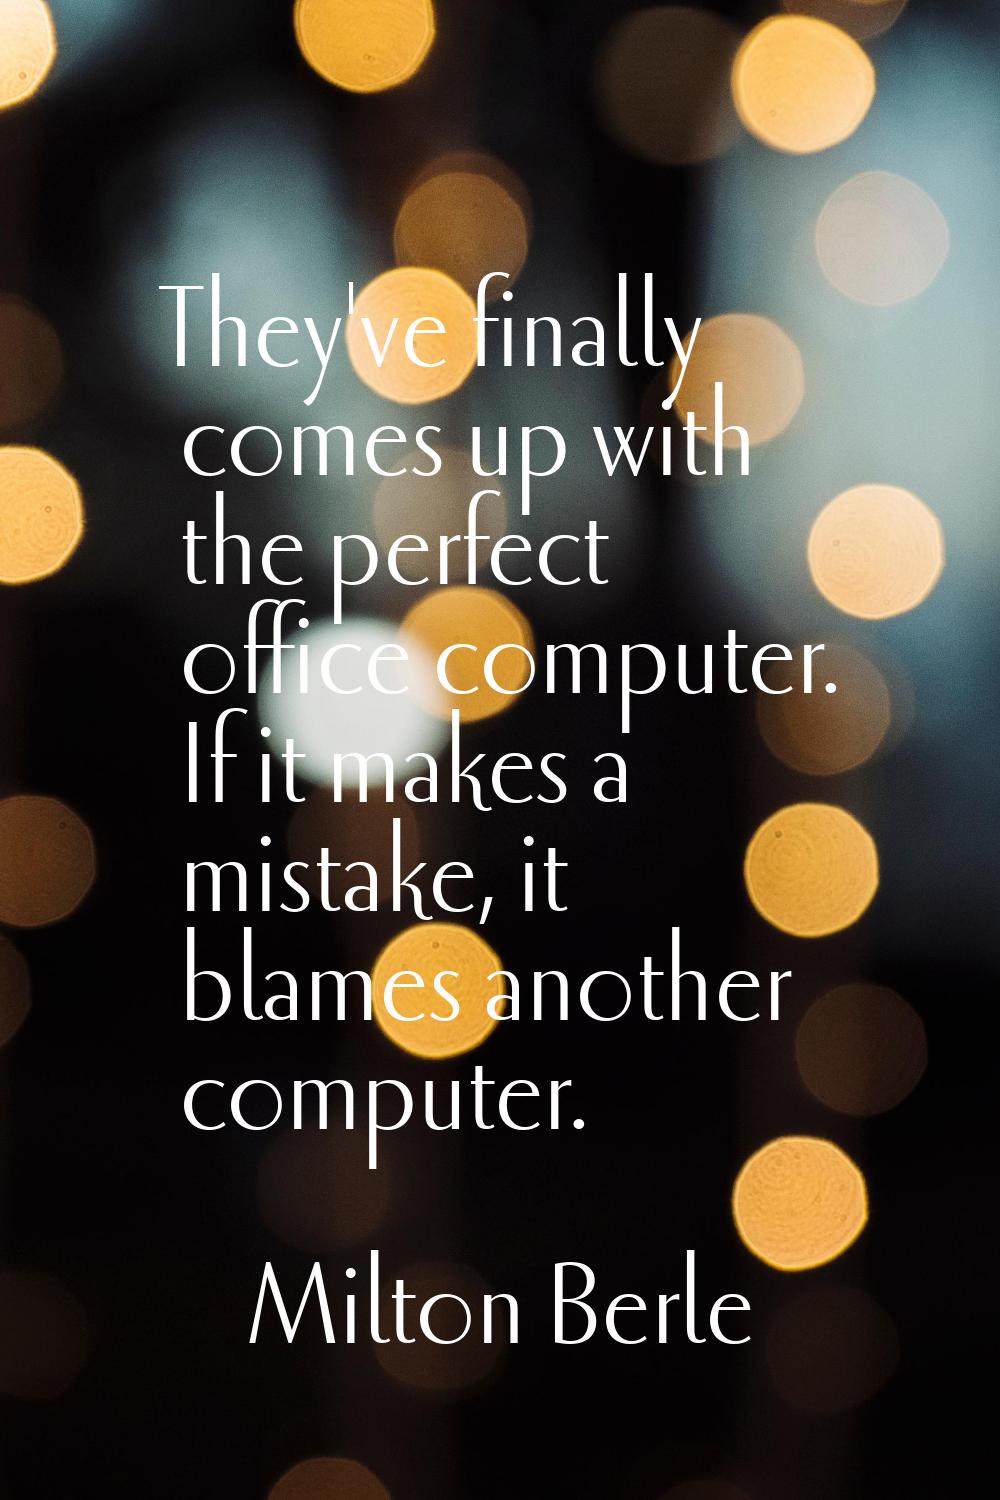 They've finally comes up with the perfect office computer. If it makes a mistake, it blames another